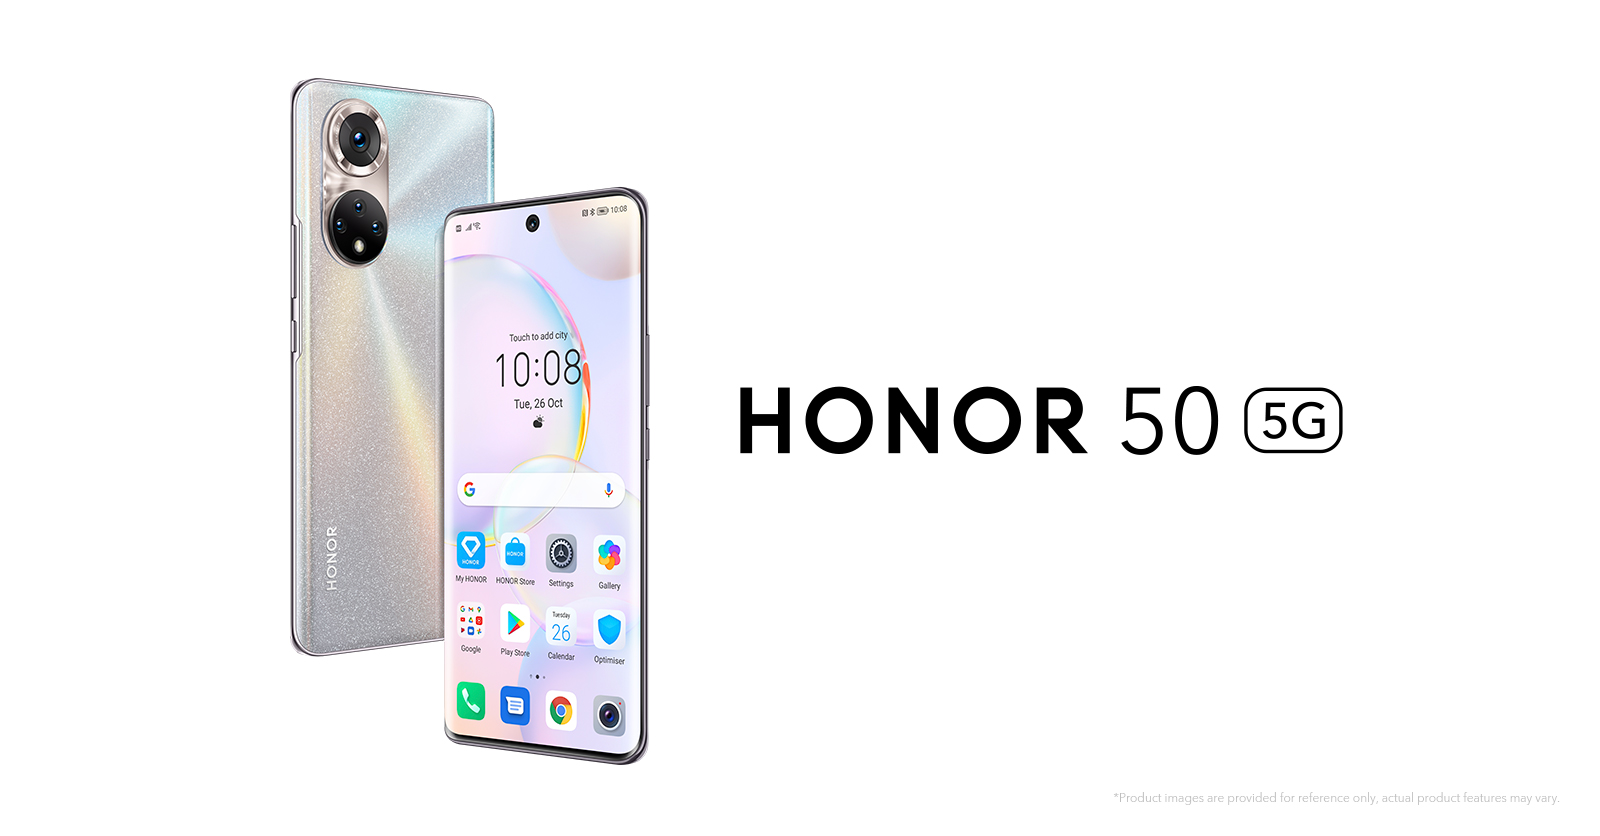 NEWS-HONOR-50-series-will-be-equipped-with-Google-Mobile-Services